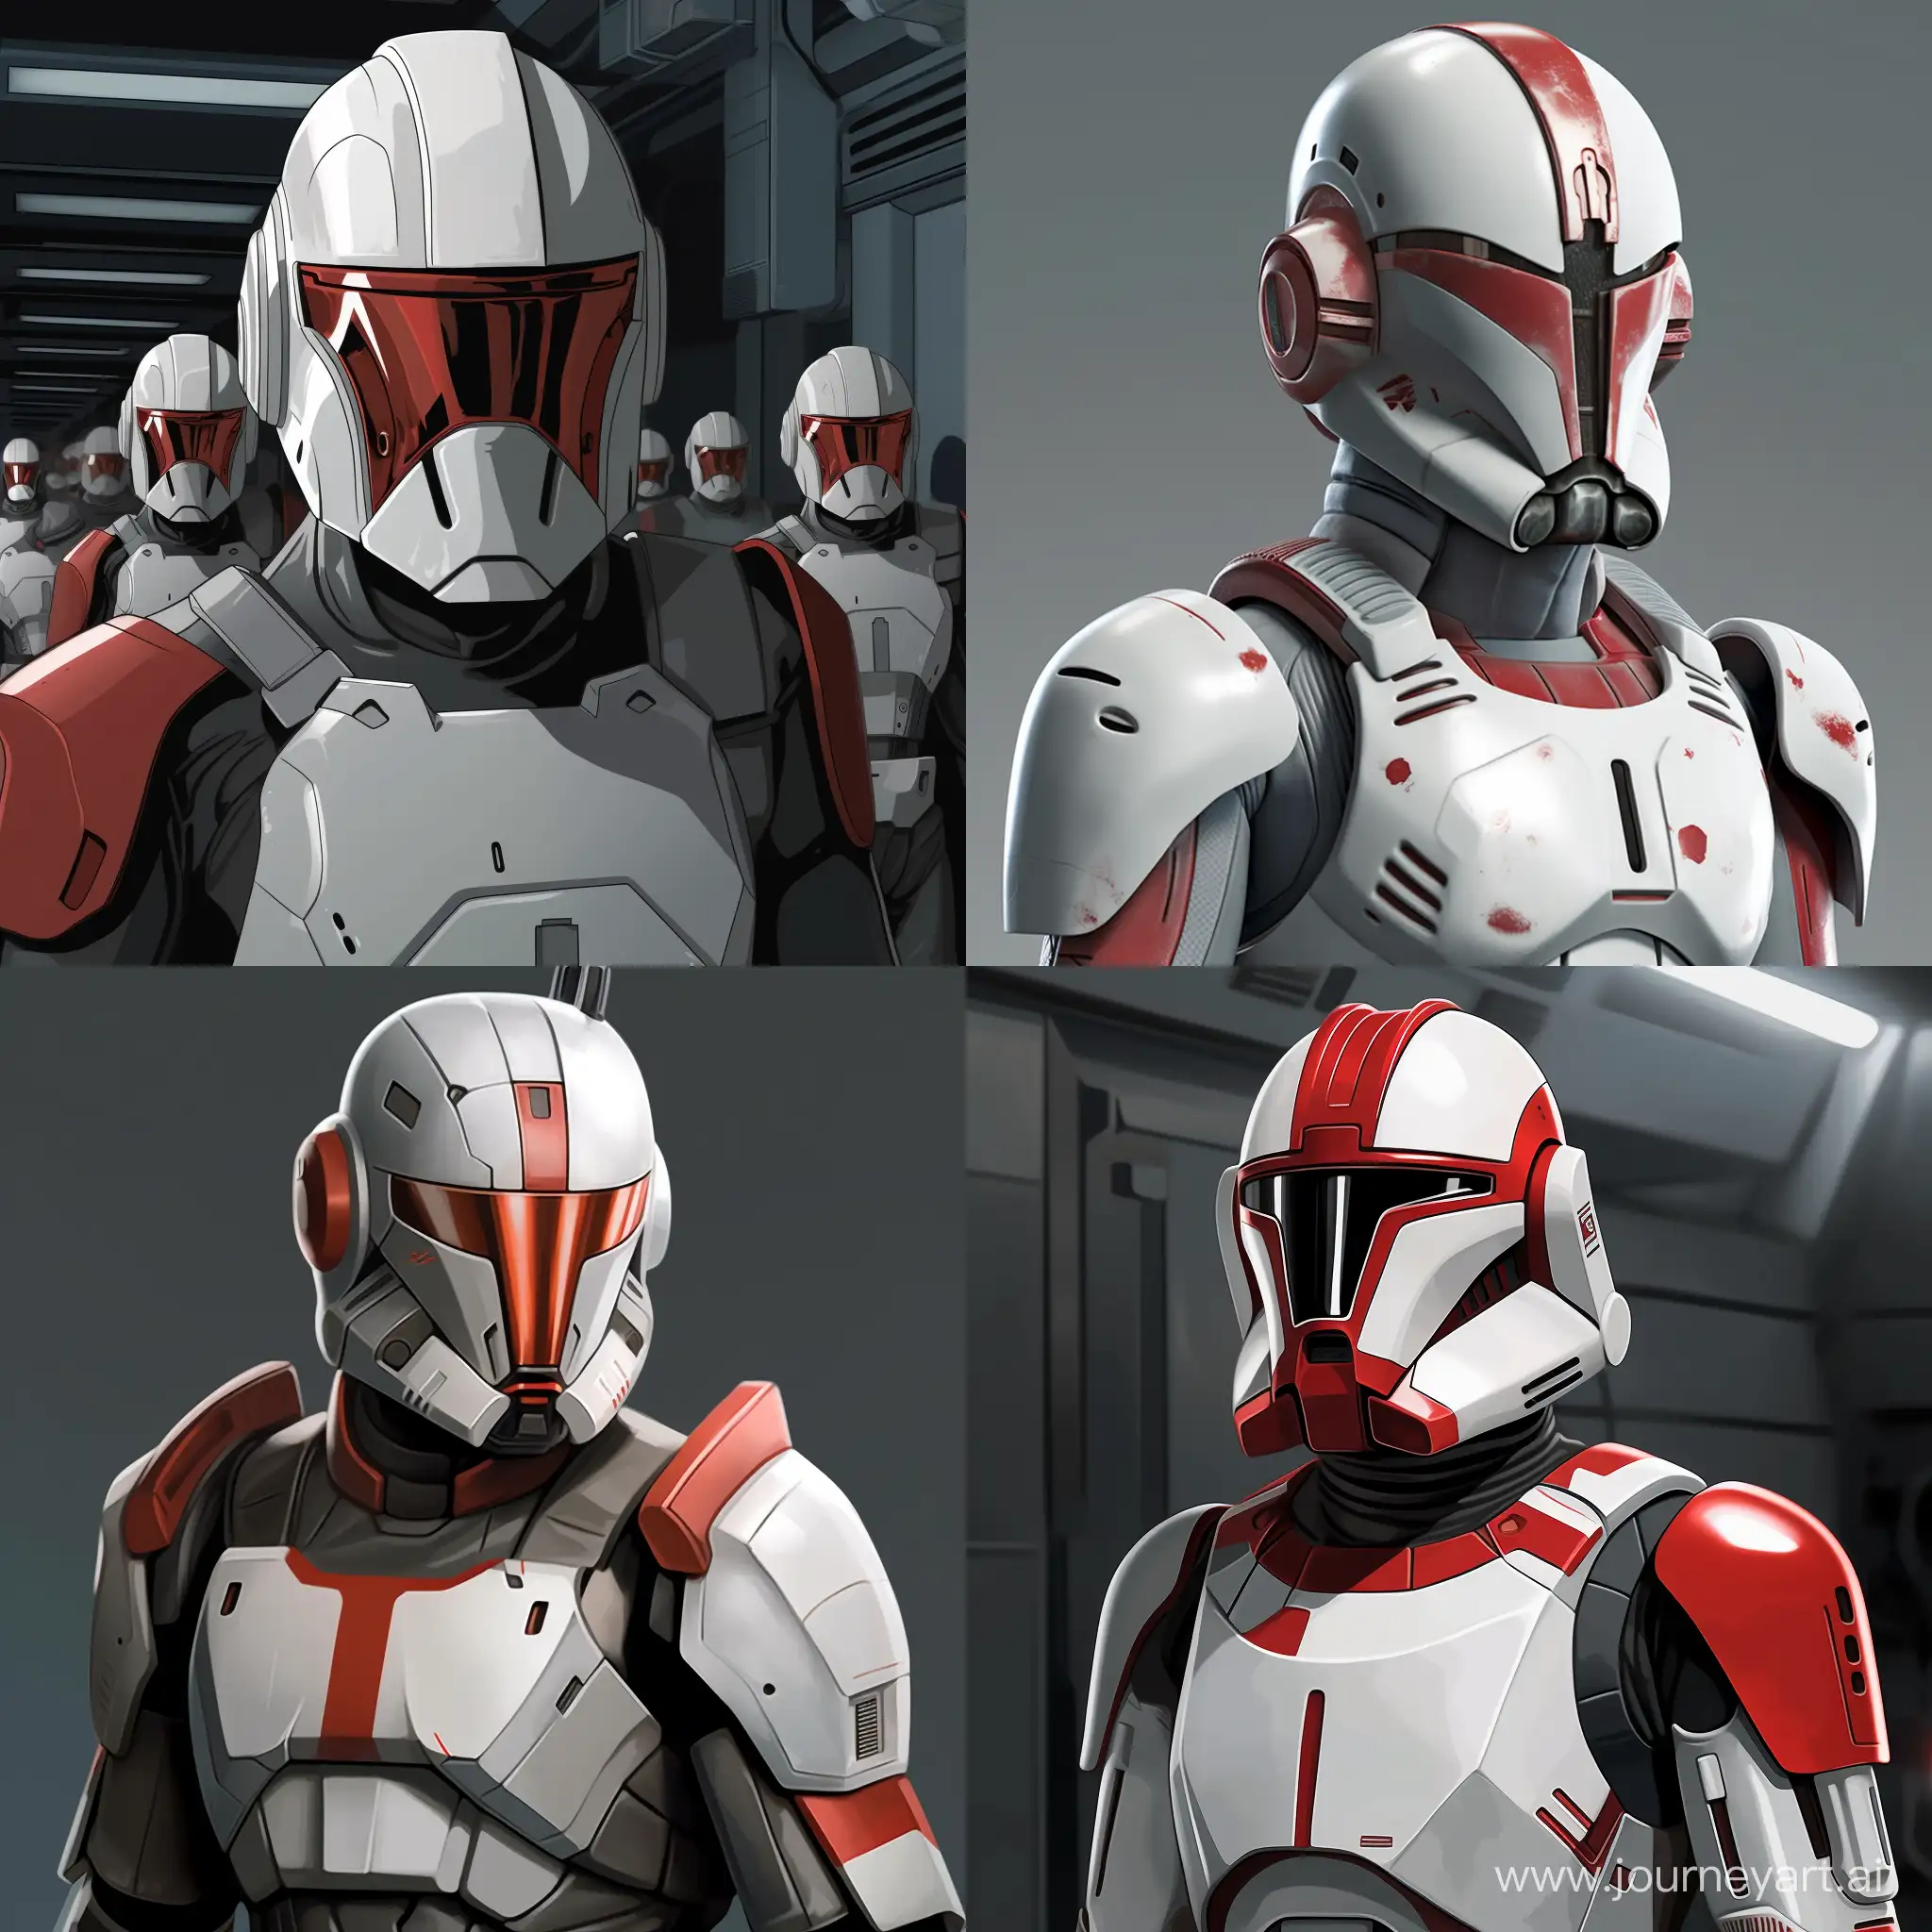 A tired clone took of his helmet. A clone from Star Wars is a genetically engineered soldier created for the Galactic Republic. Clones typically wear white plastoid-alloy armor with a T-shaped visor on their helmets. Trained for combat, they wield DC-15 blaster rifles and are organized into units. Each clone has a distinct identification number, and some may have personalized markings on their armor. Clones played a significant role in the Clone Wars, a conflict depicted in the Star Wars universe.